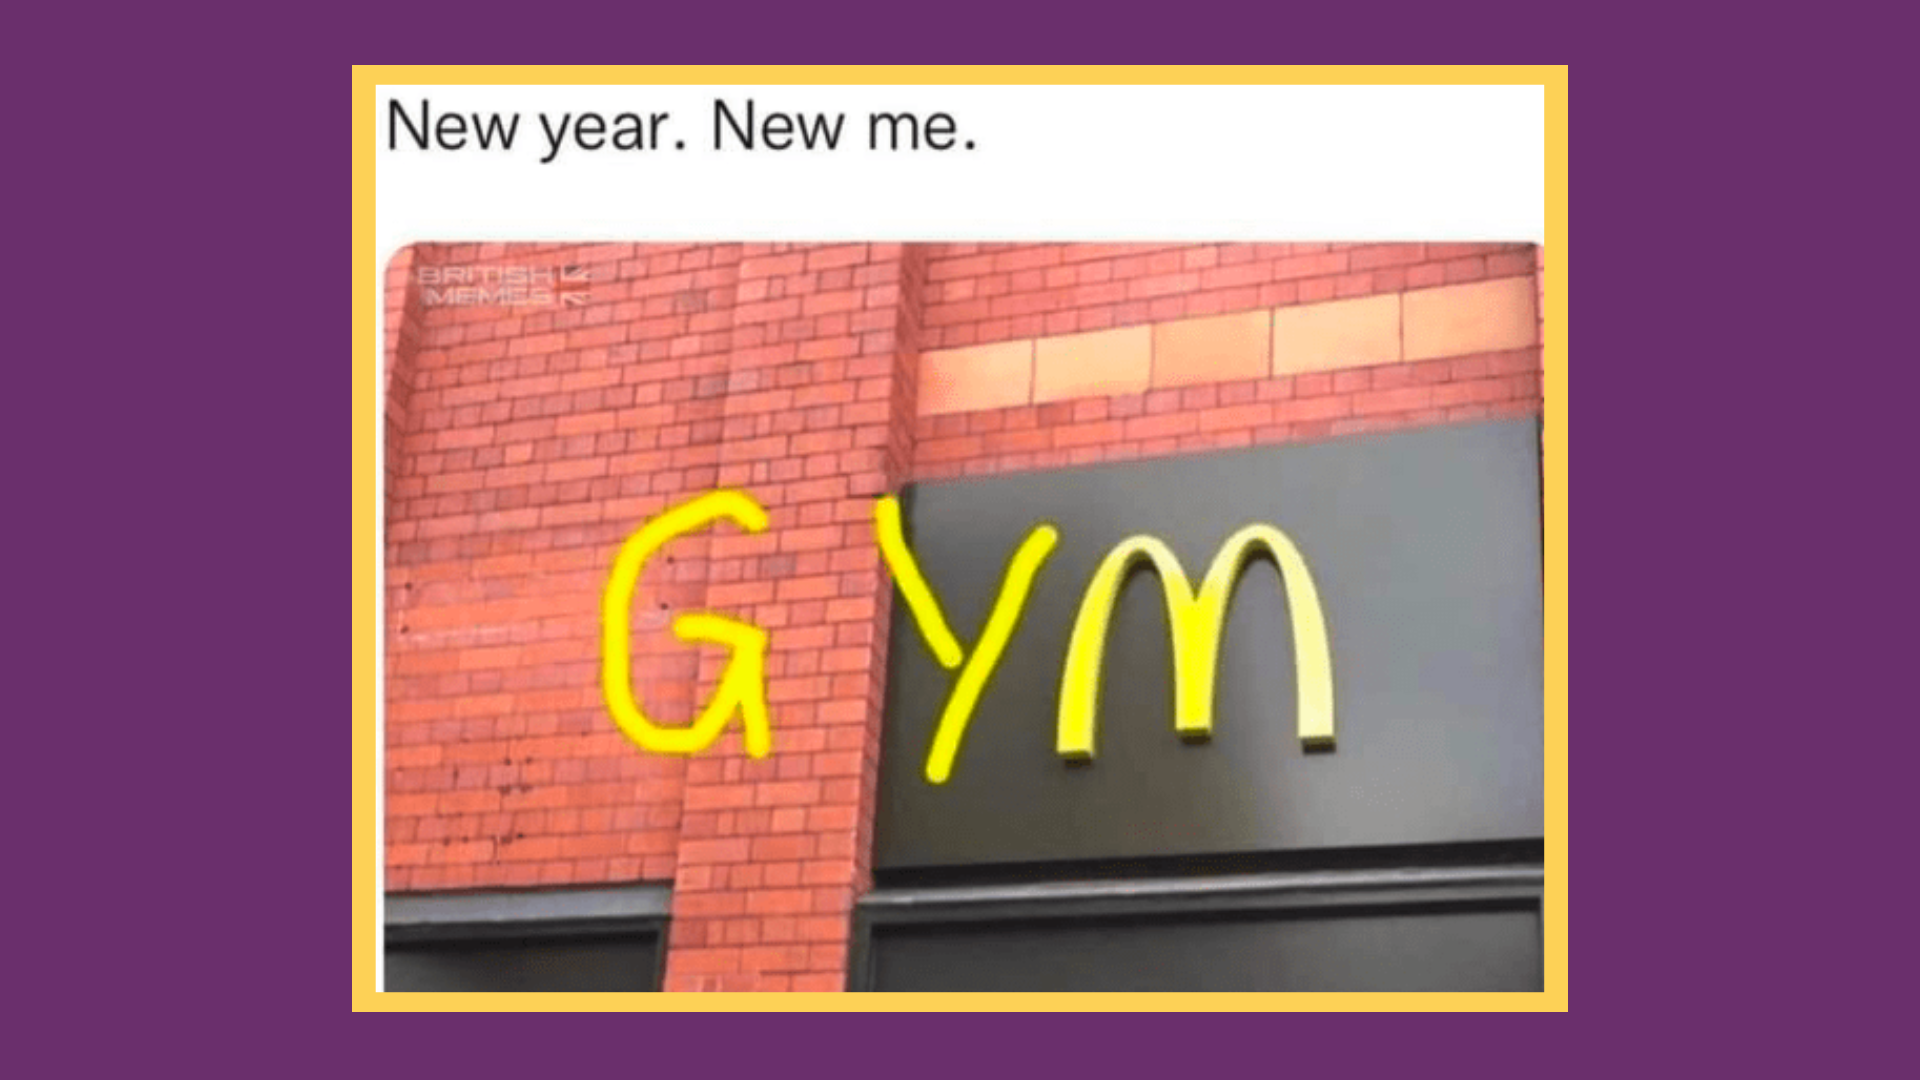 My approach to New Year’s Resolutions (and why it works)